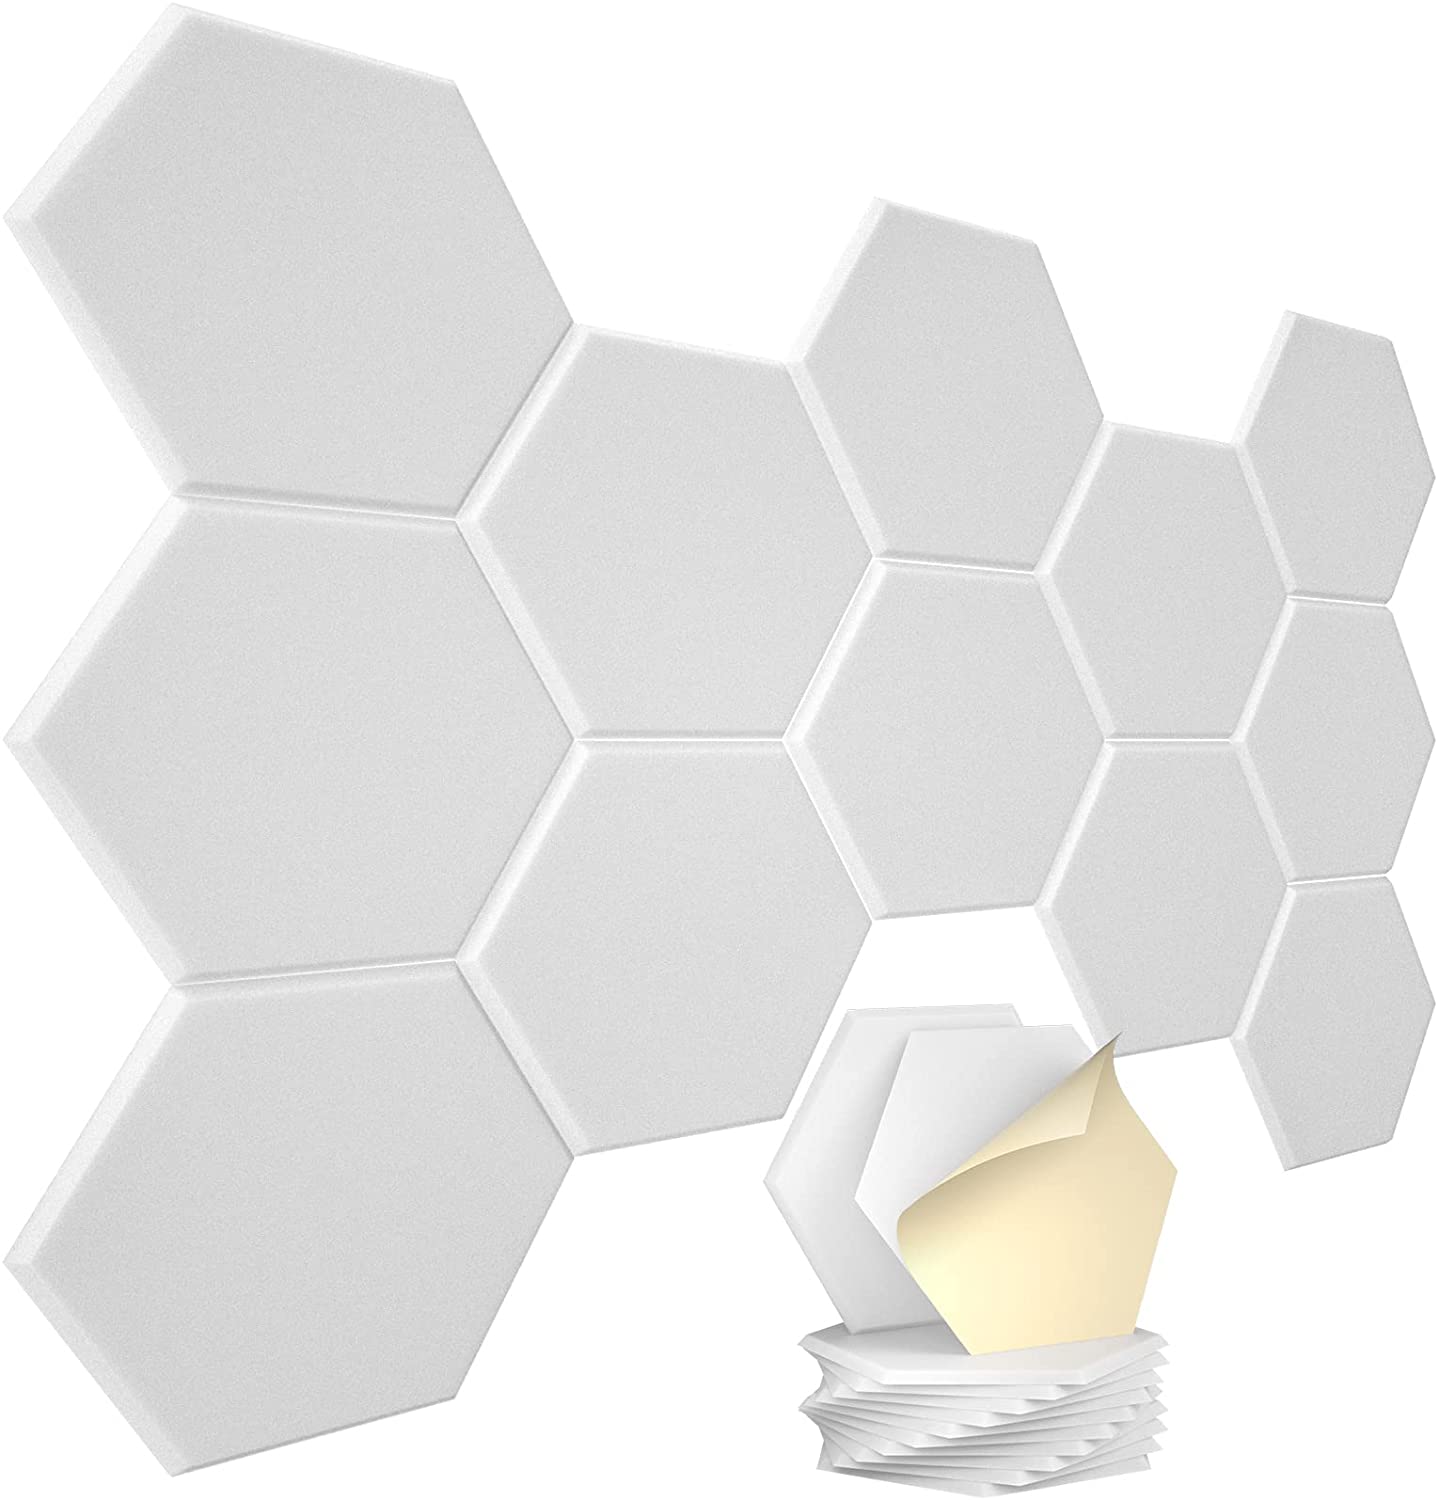 Hex Acoustic Wall Panels